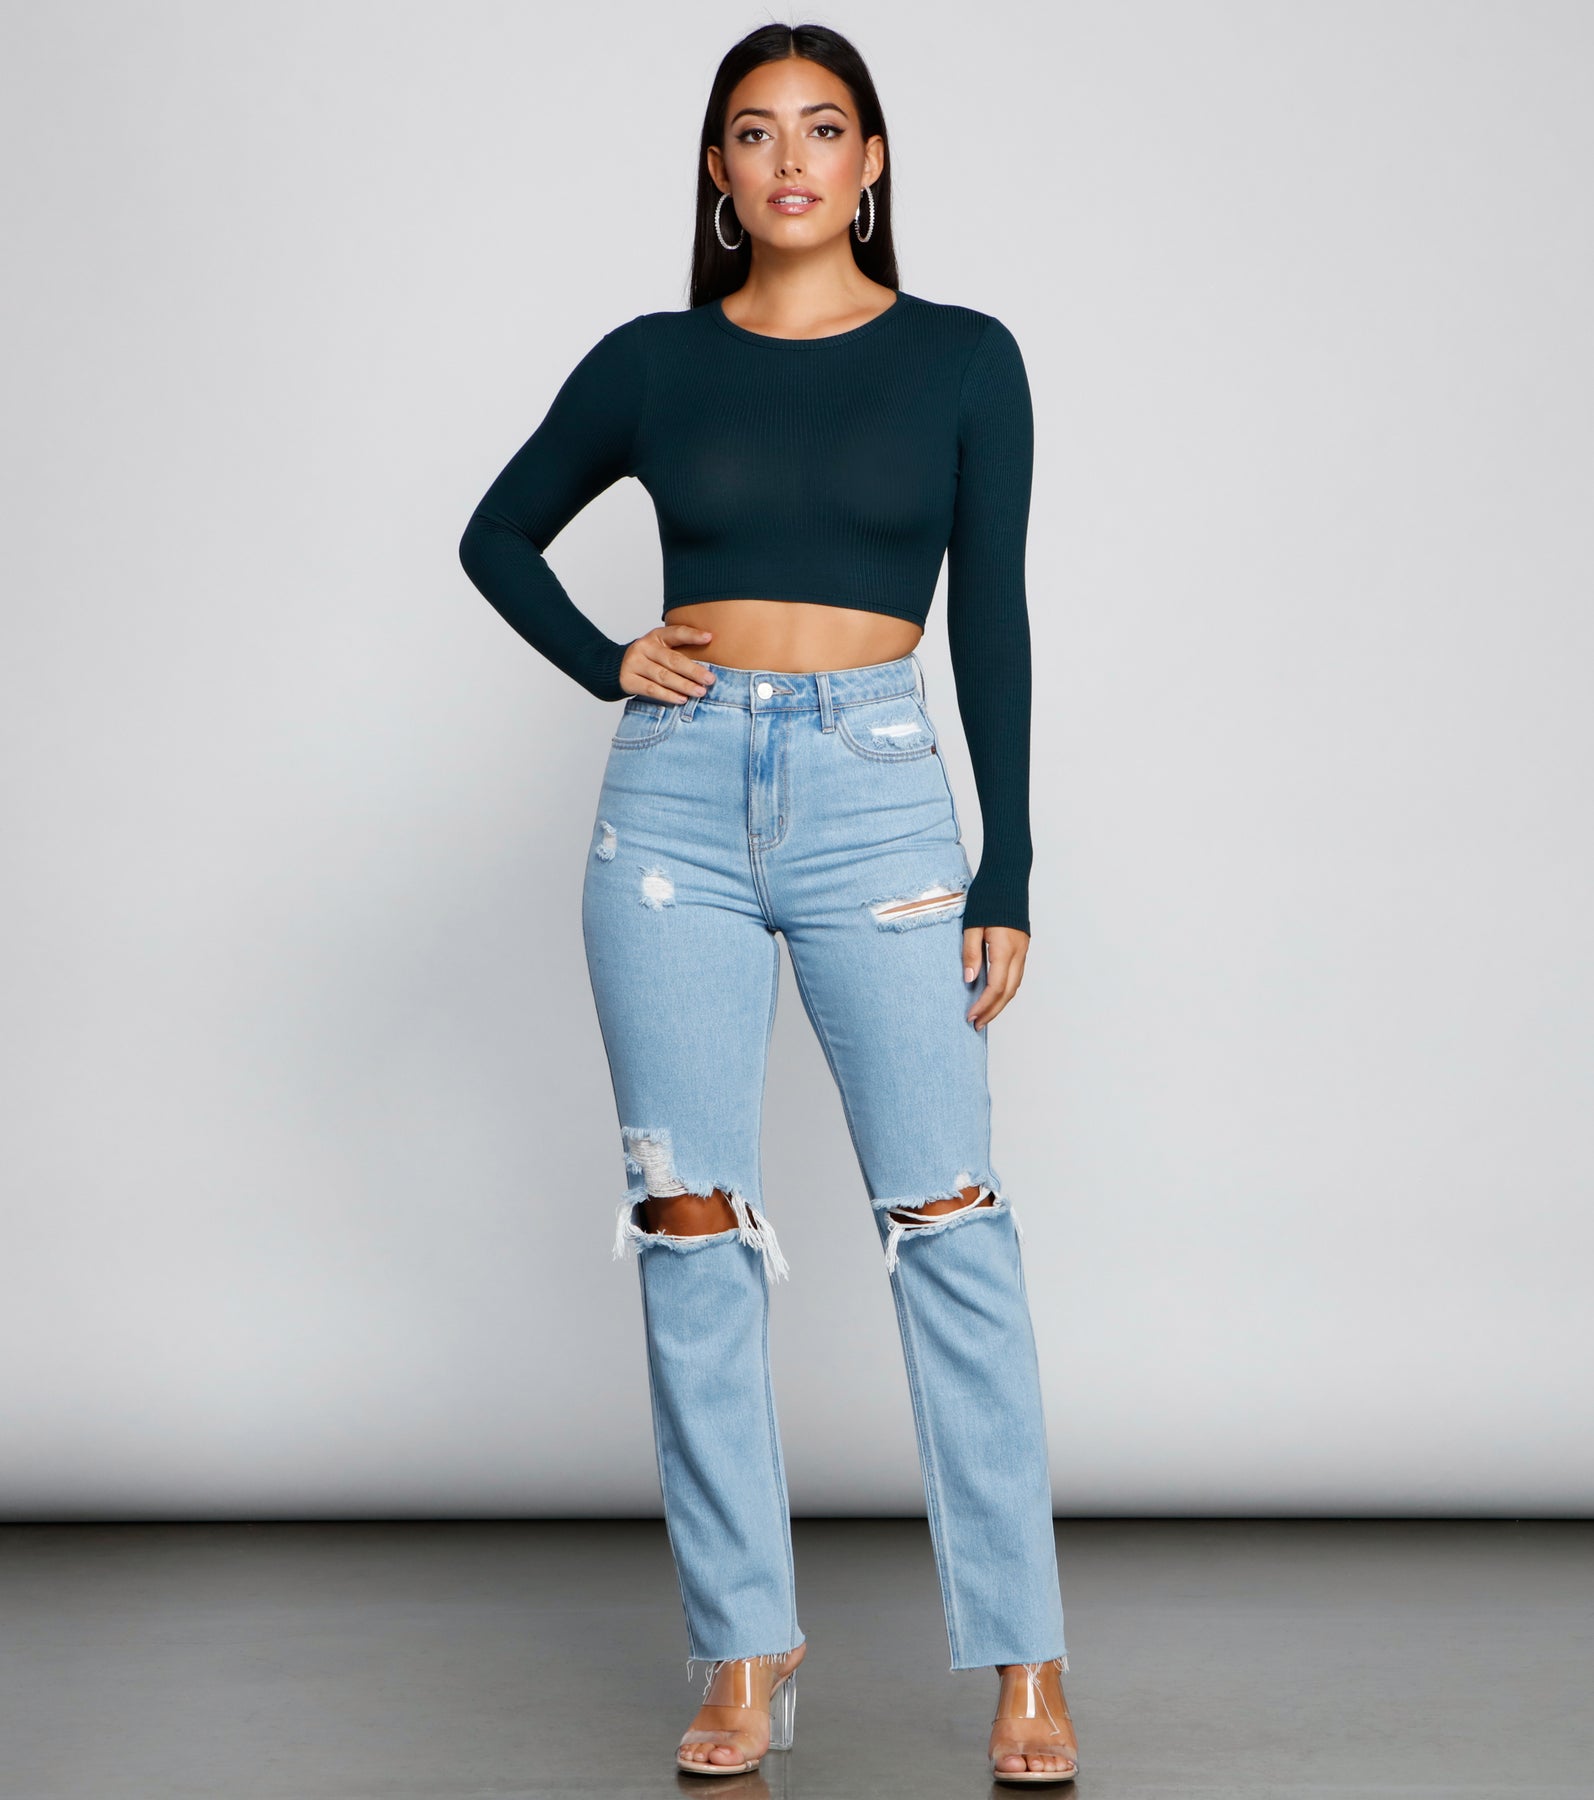 Go With It Ribbed Knit Crop Top & Windsor